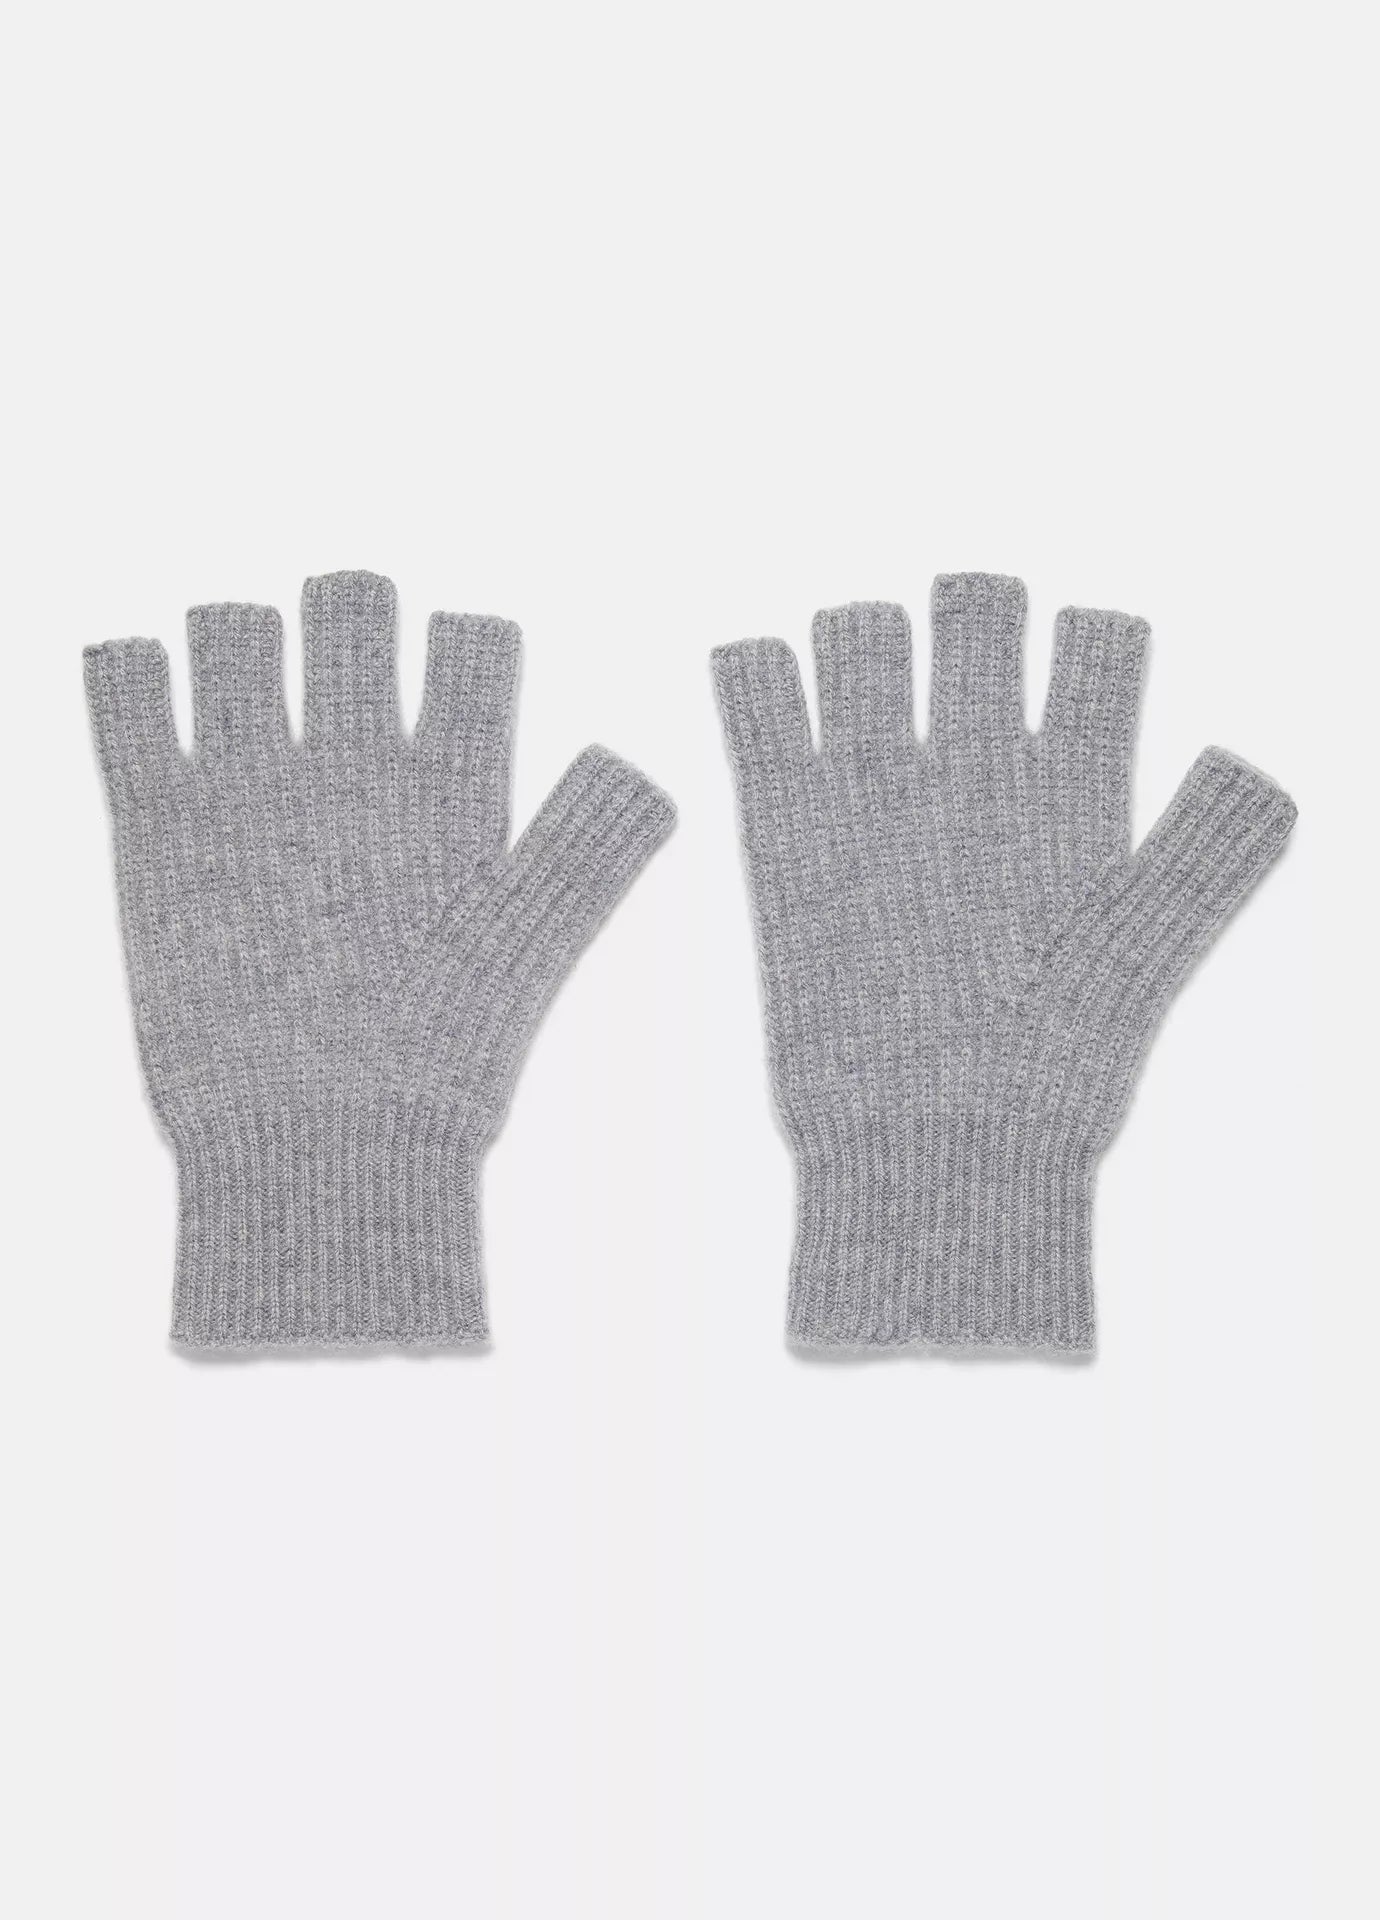 Vince Boiled Cashmere Fingerless Rib Knit Glove, Fingerless Gloves, cashmere gloves, cashmere, winter accessories, women's clothing